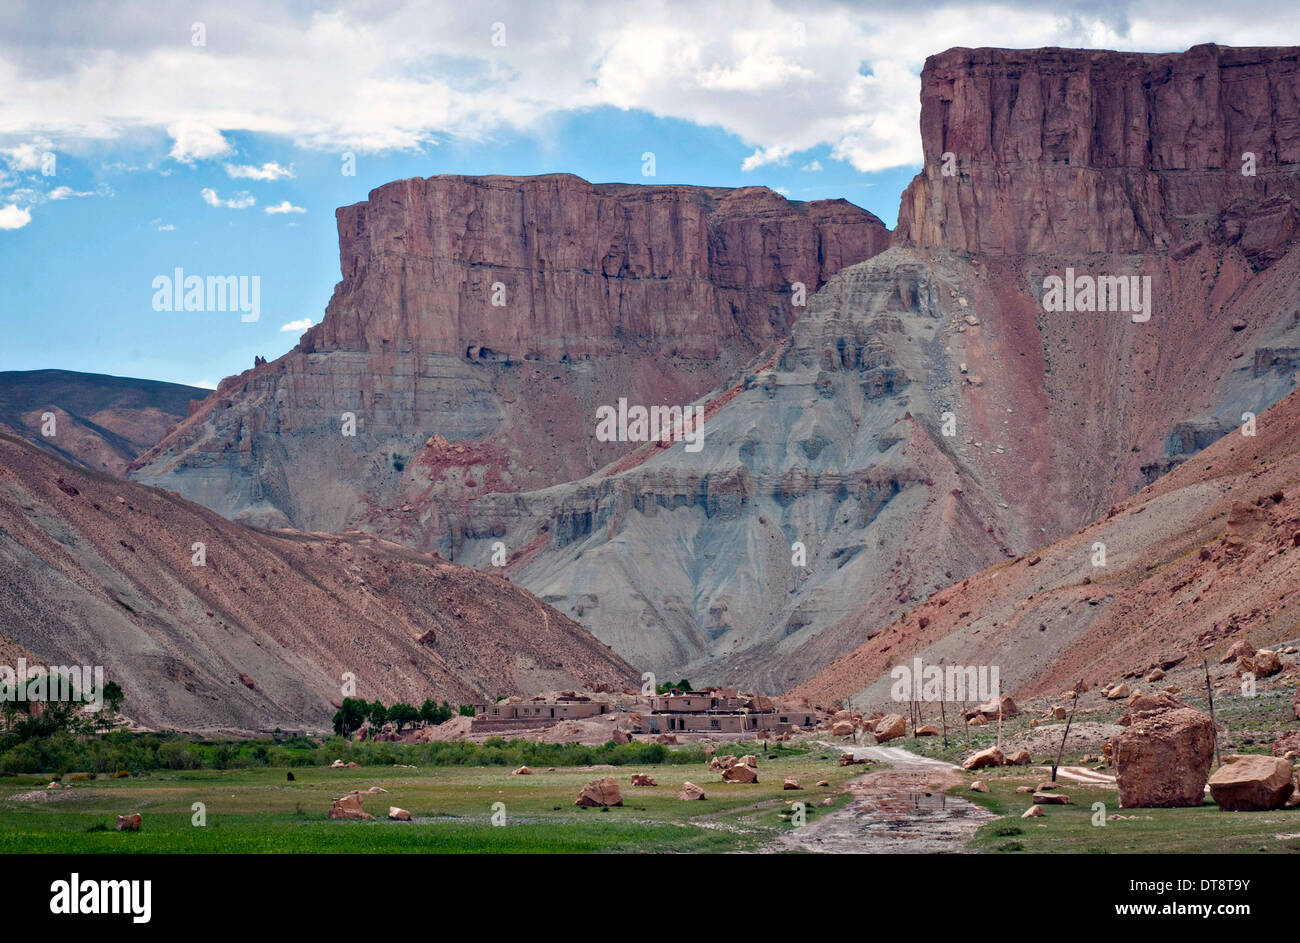 View of the canyons at the Band-e-Amir National Park June 27, 2012 in Bamyan, Afghanistan. The park is known as Afghanistan's Grand Canyon. Stock Photo